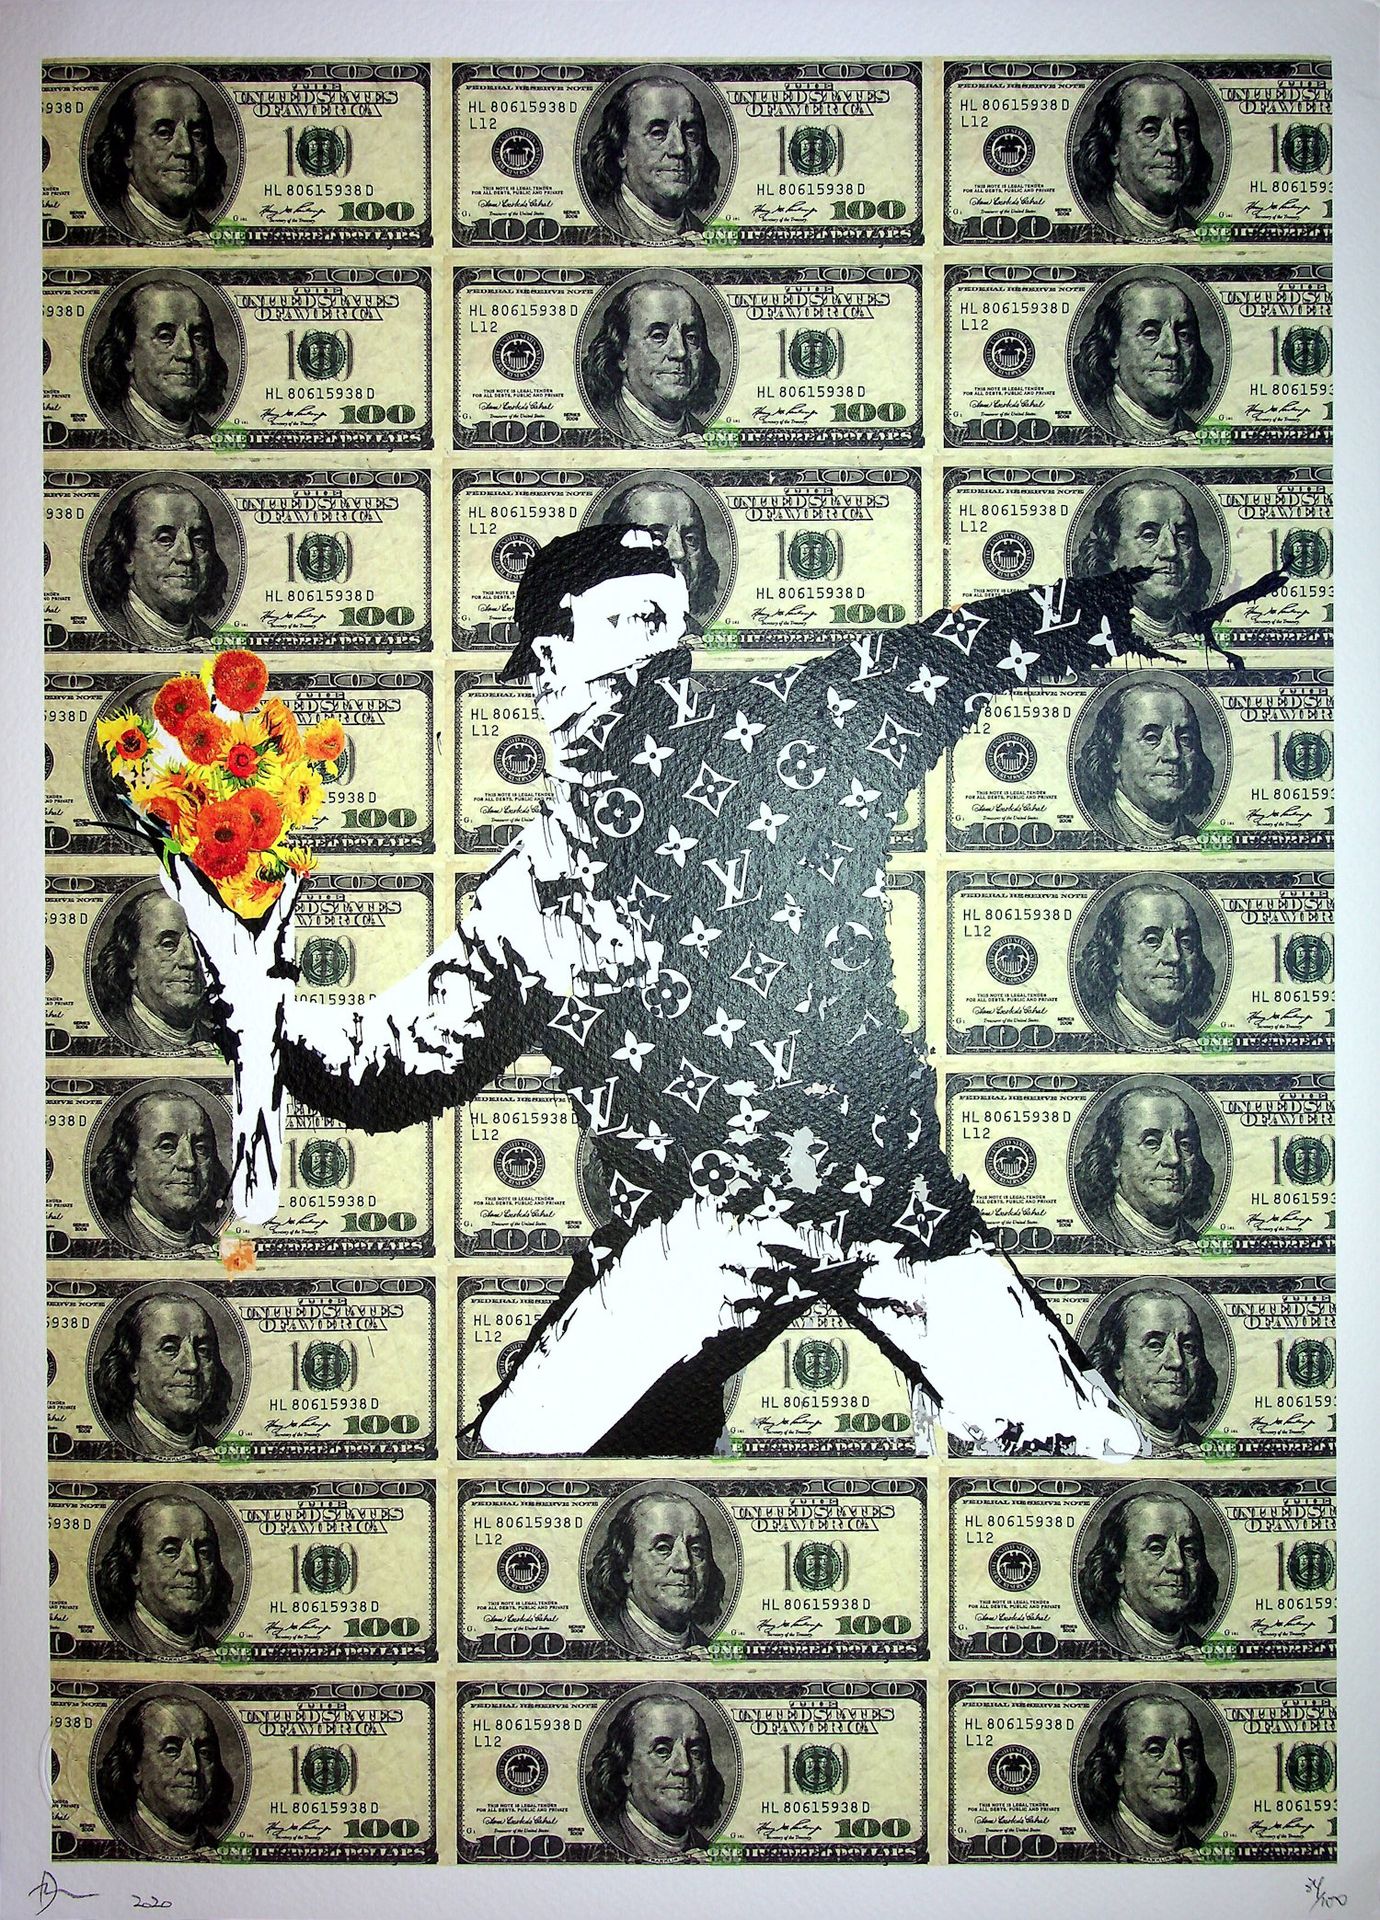 Death NYC Death NYC

Bansky: The Van Gogh's flowers thrower, 2020

Sérigraphie o&hellip;